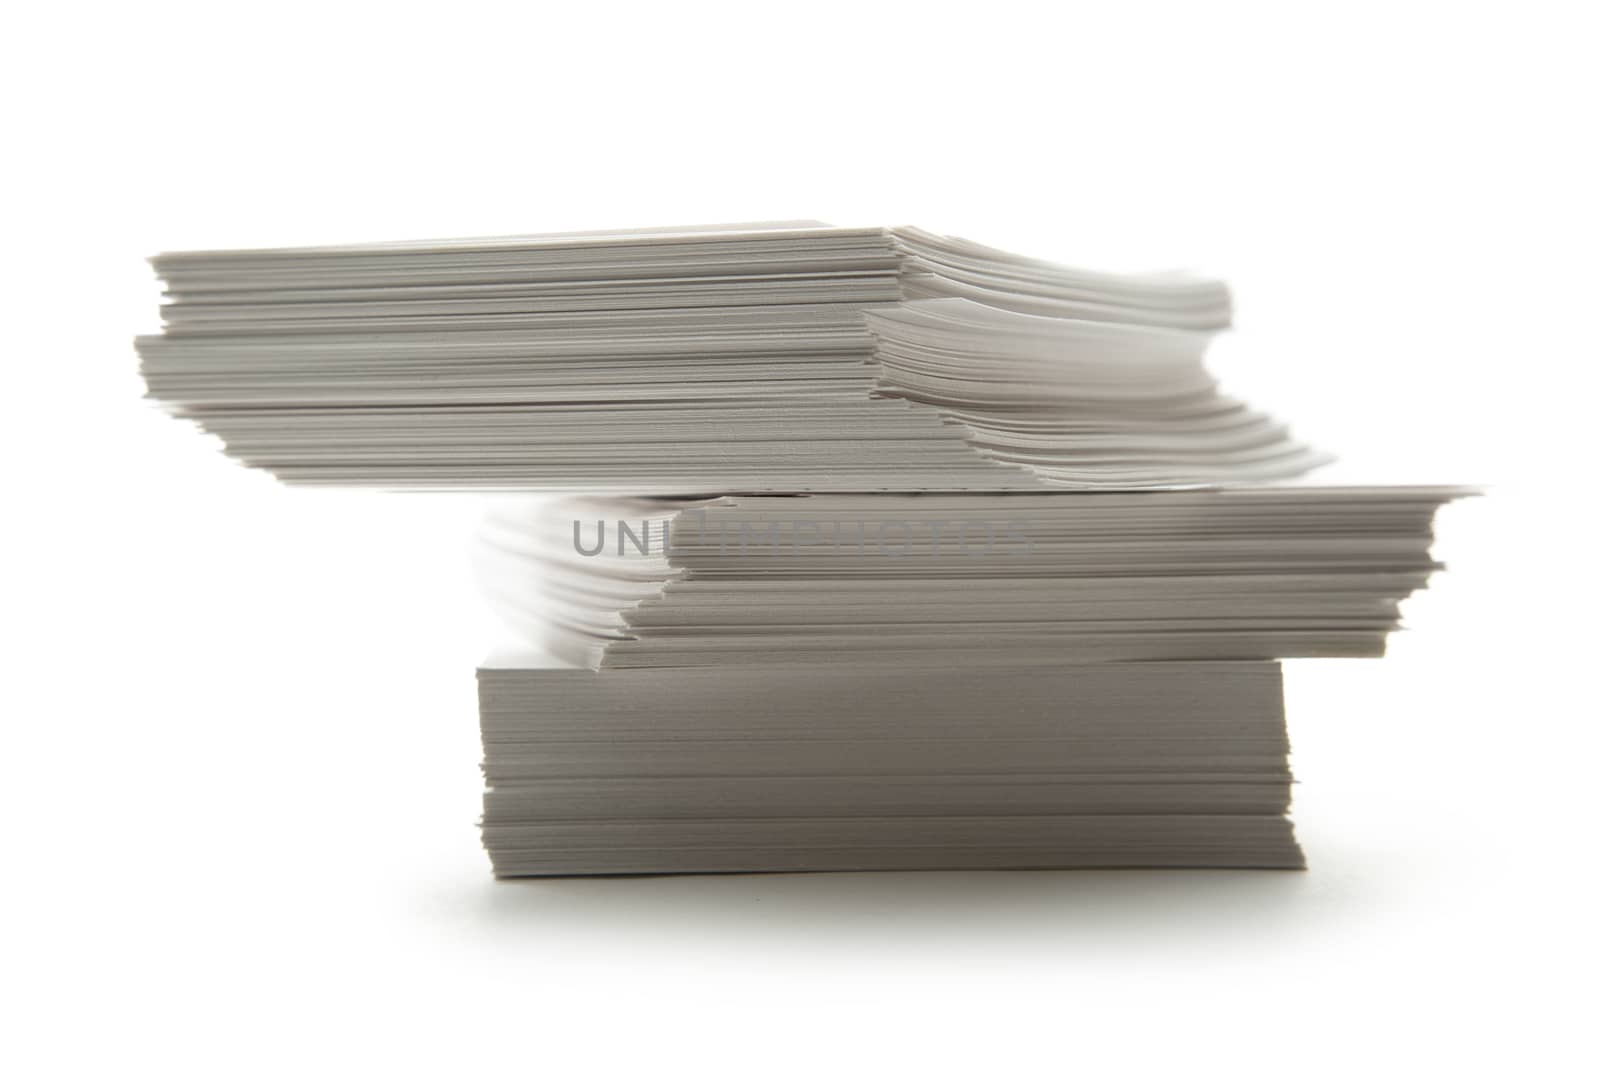 Stack of white paper cards by Garsya